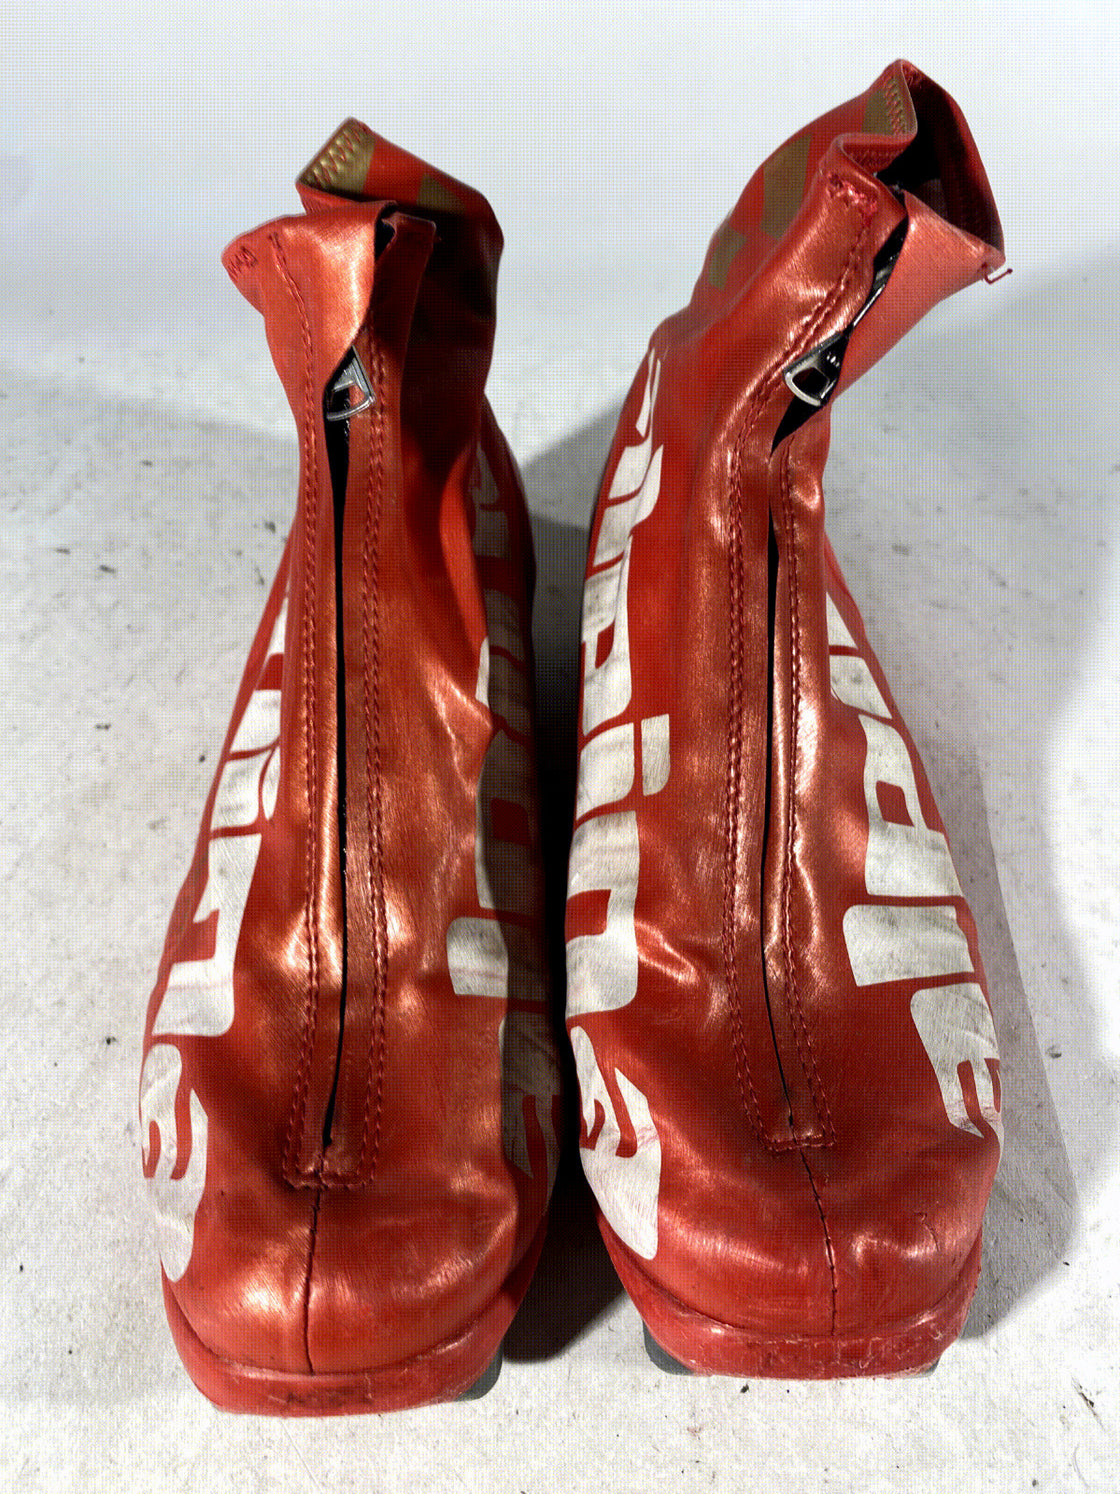 Alpina ECL Elite Classic Nordic Cross Country Ski Boots Size EU39 US7 for NNN